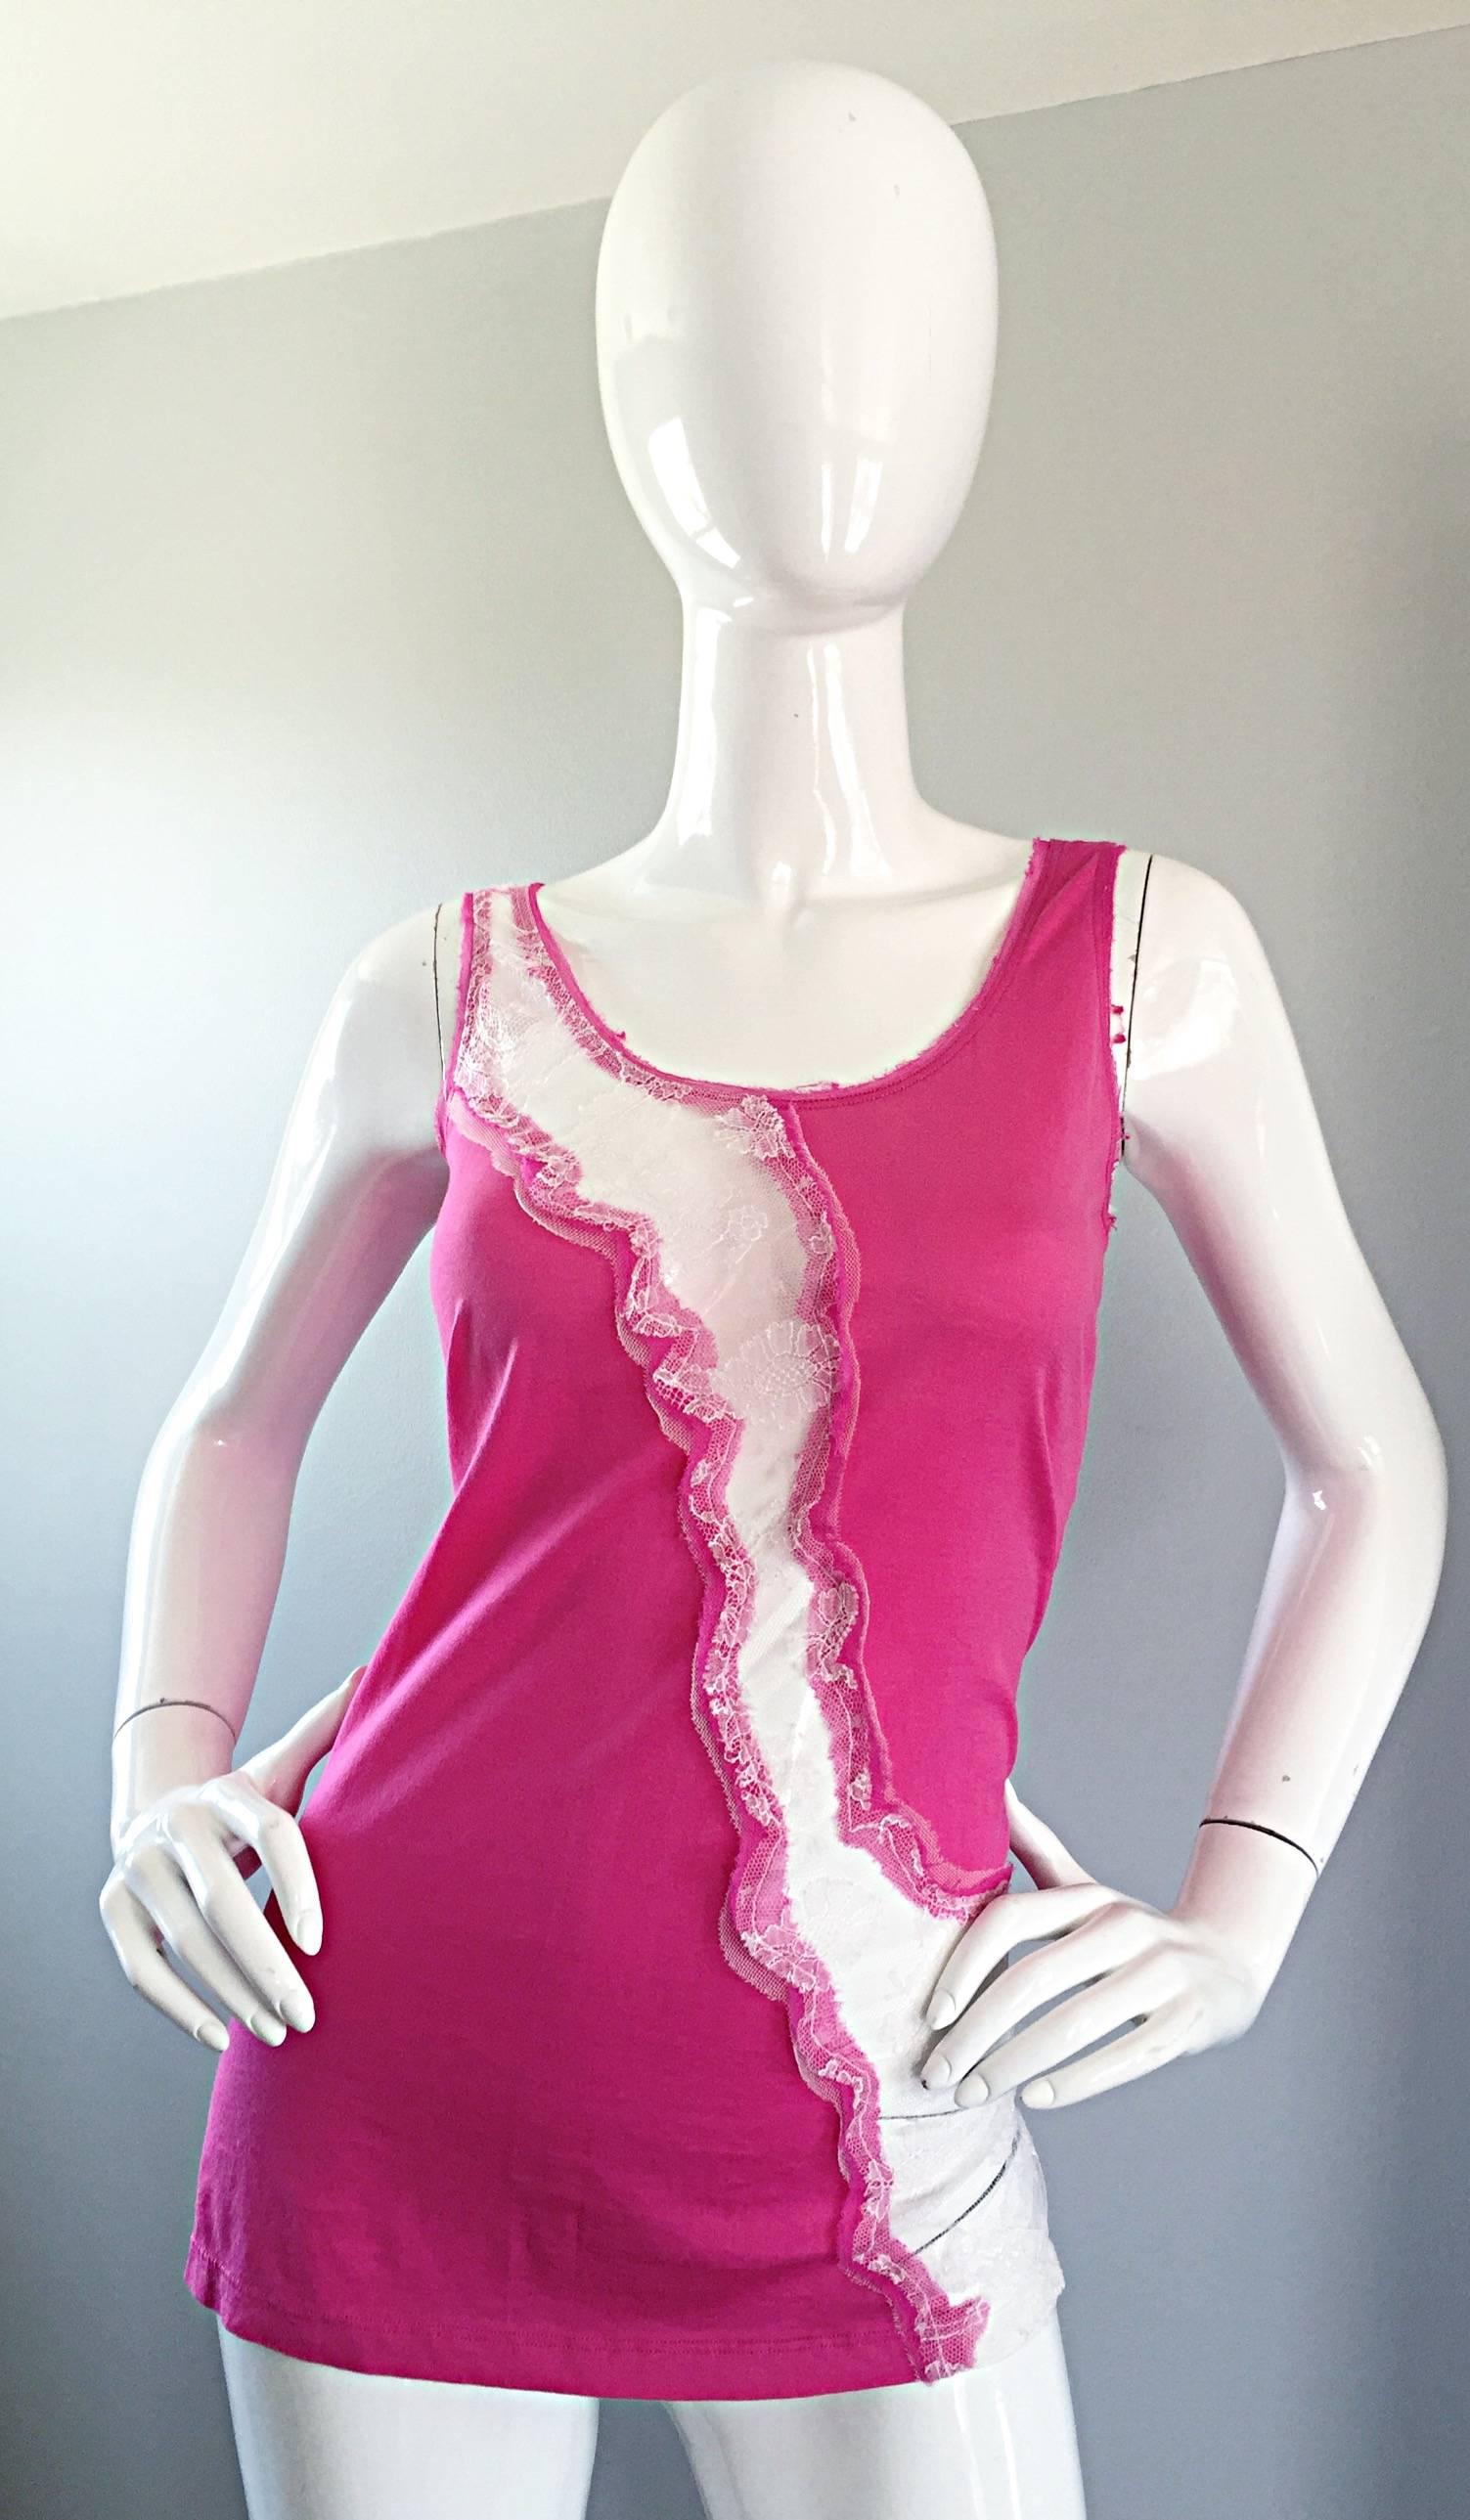 John Galliano Hot Pink + White Sleeveless Cotton Blouse w/ Lace Cut - Outs  For Sale 2